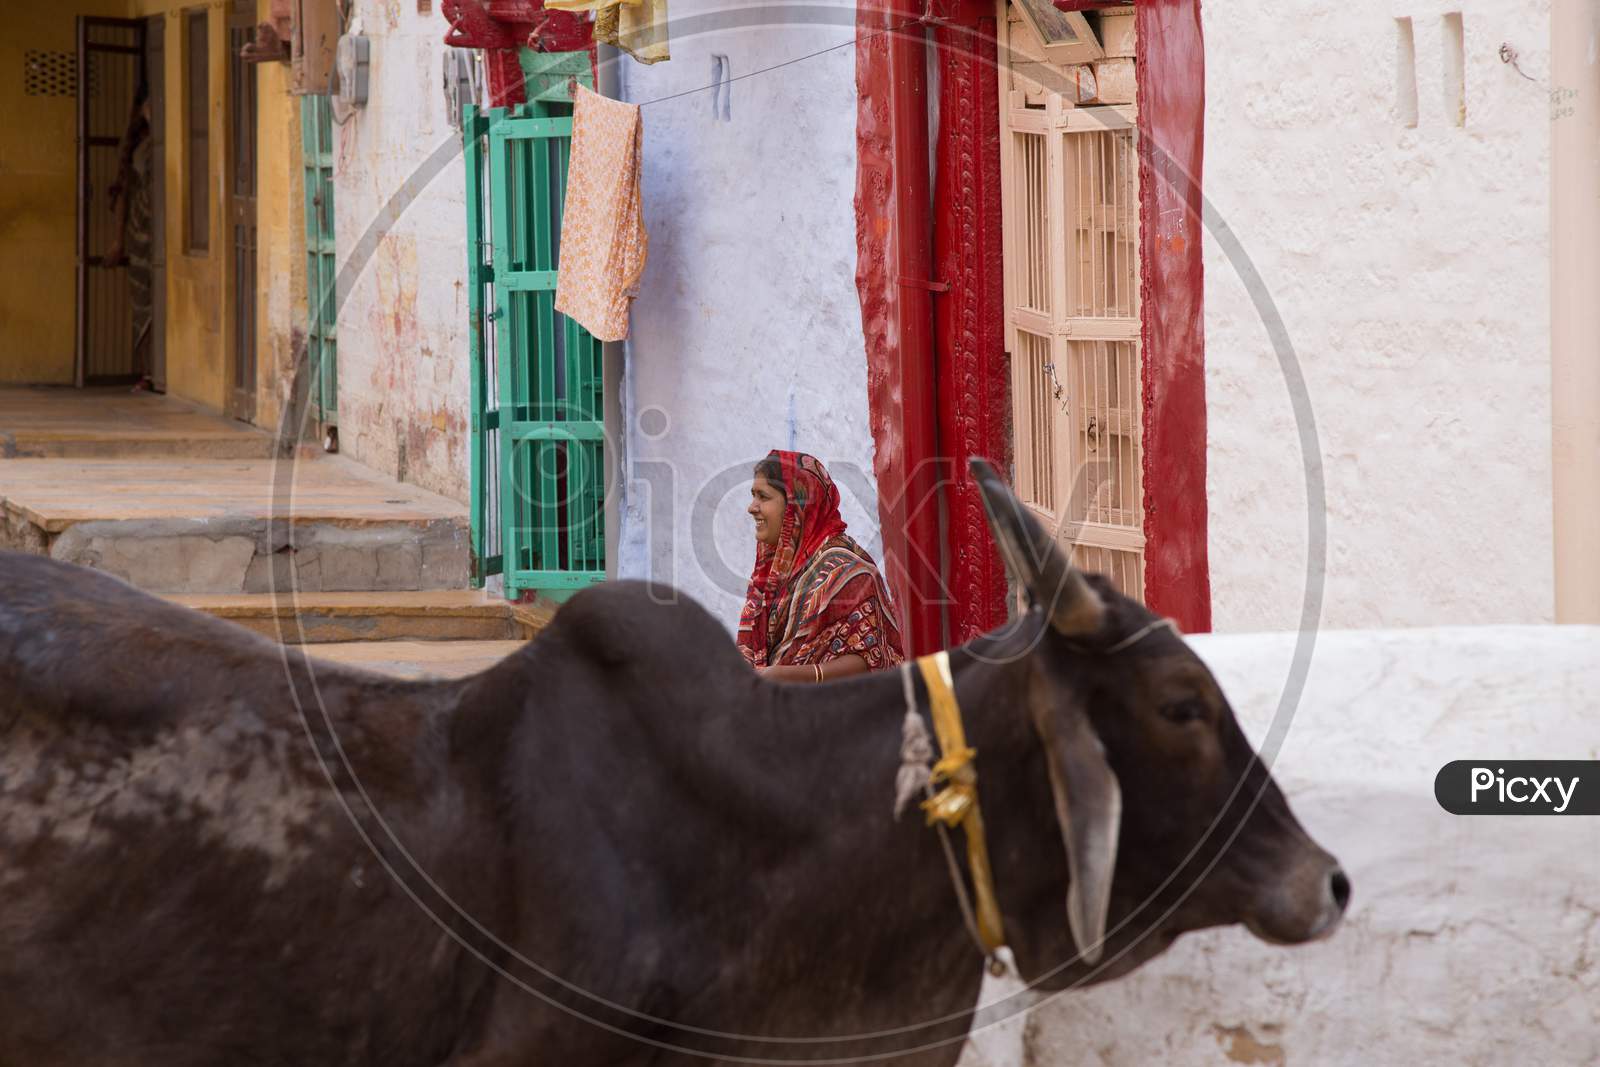 A Rajasthani Woman Sitting At a House Door Steps  in Jaisalmer